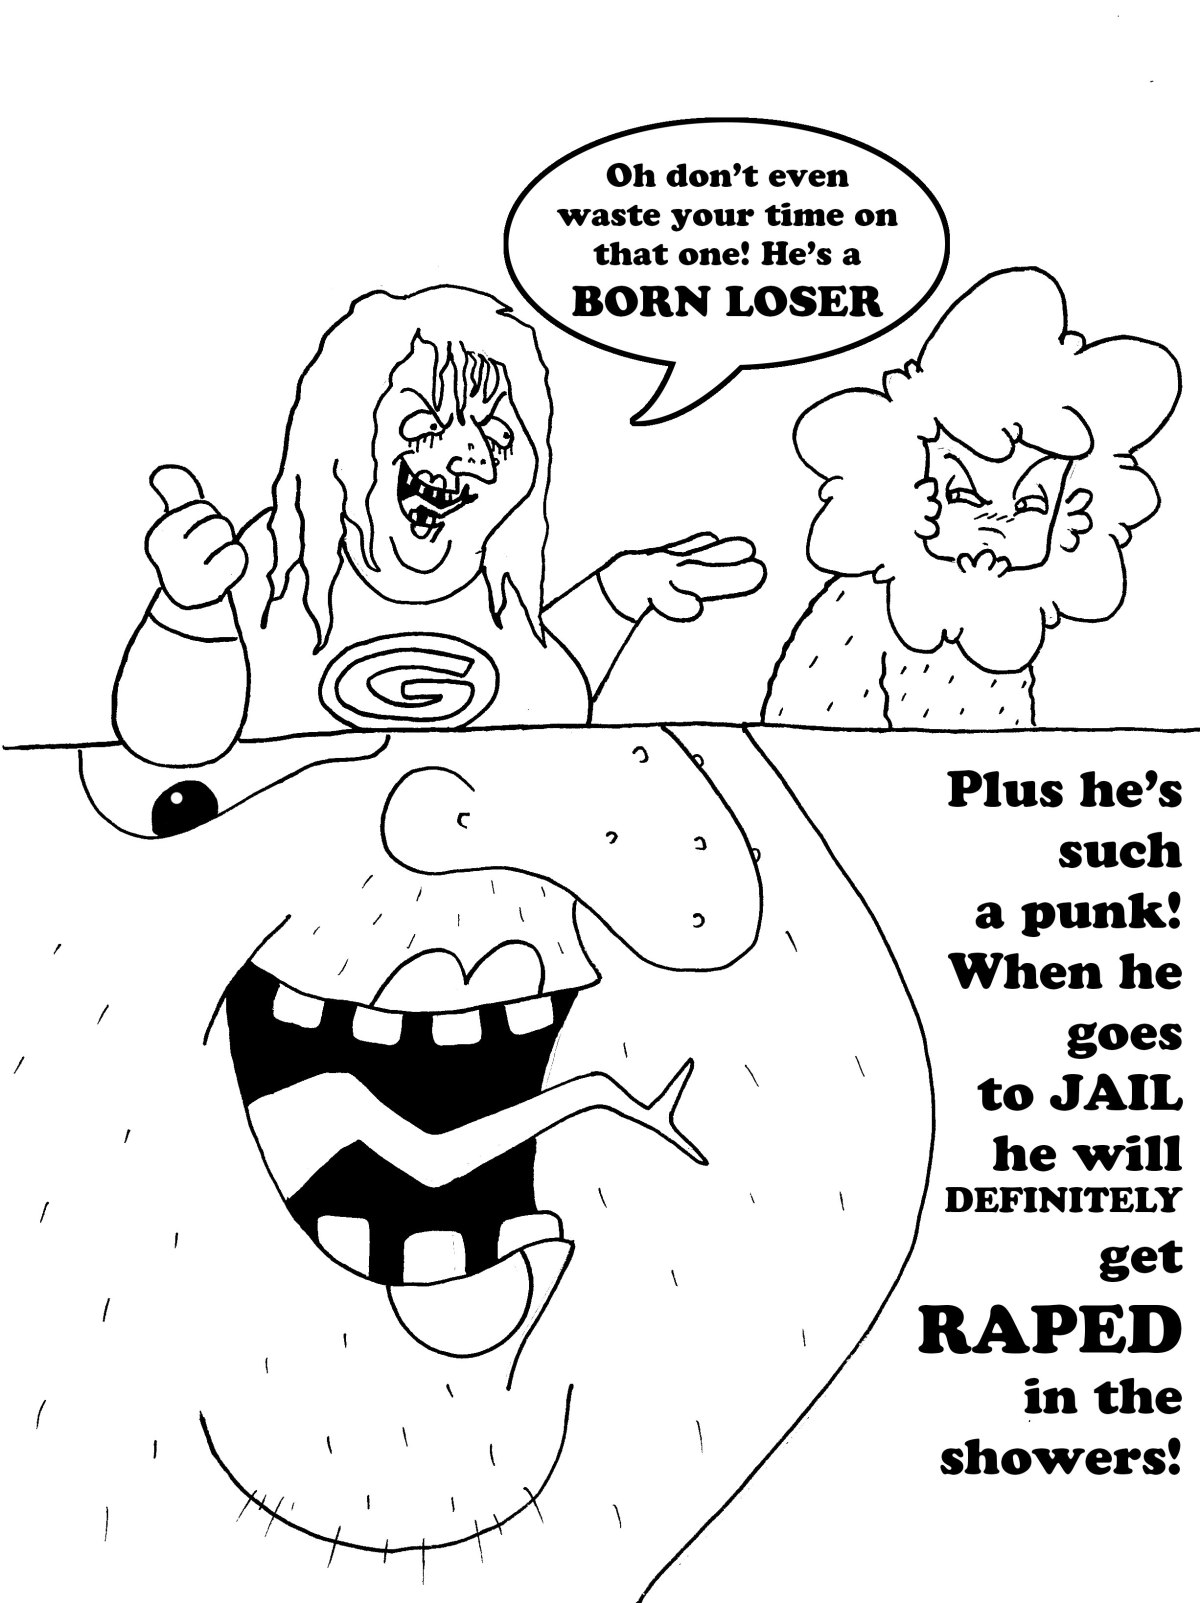 He's a BORN LOSER who will go to JAIL and get RAPED in the showers ...